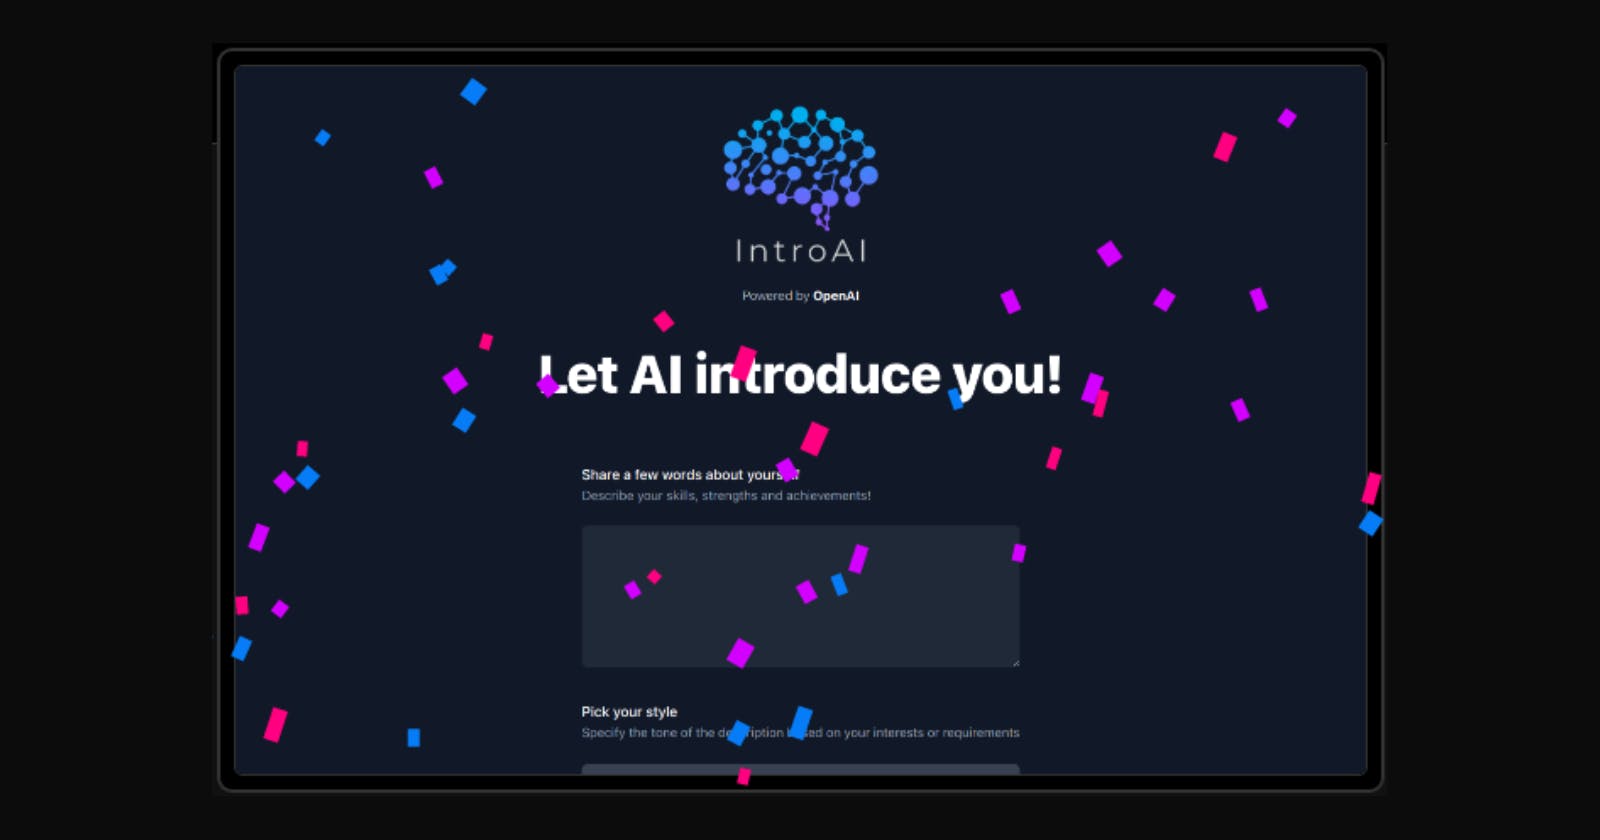 Introducing IntroAI - Introductions by OpenAI